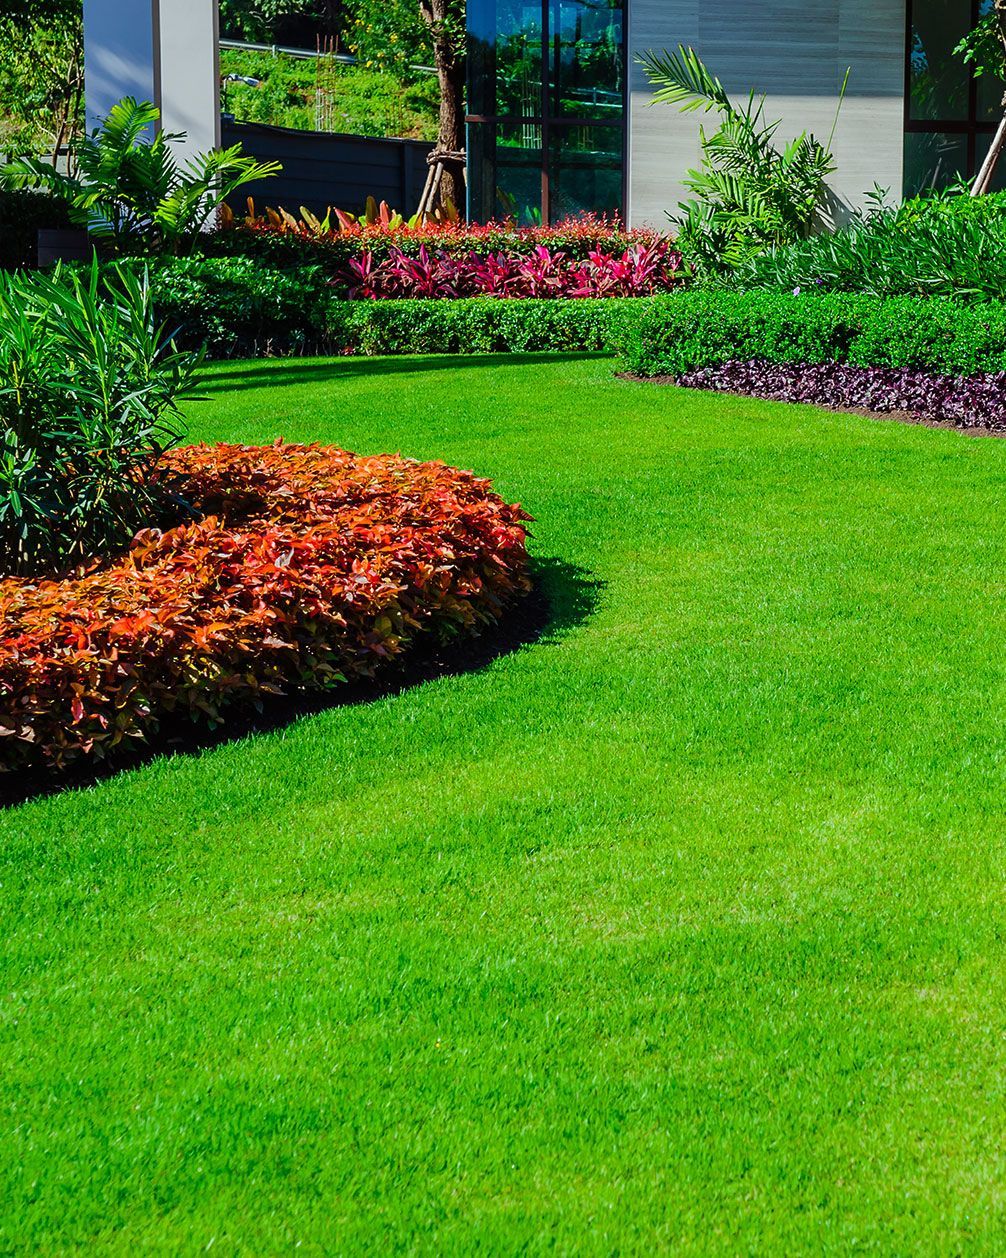 a lush green lawn with flowers and bushes in front of a building .